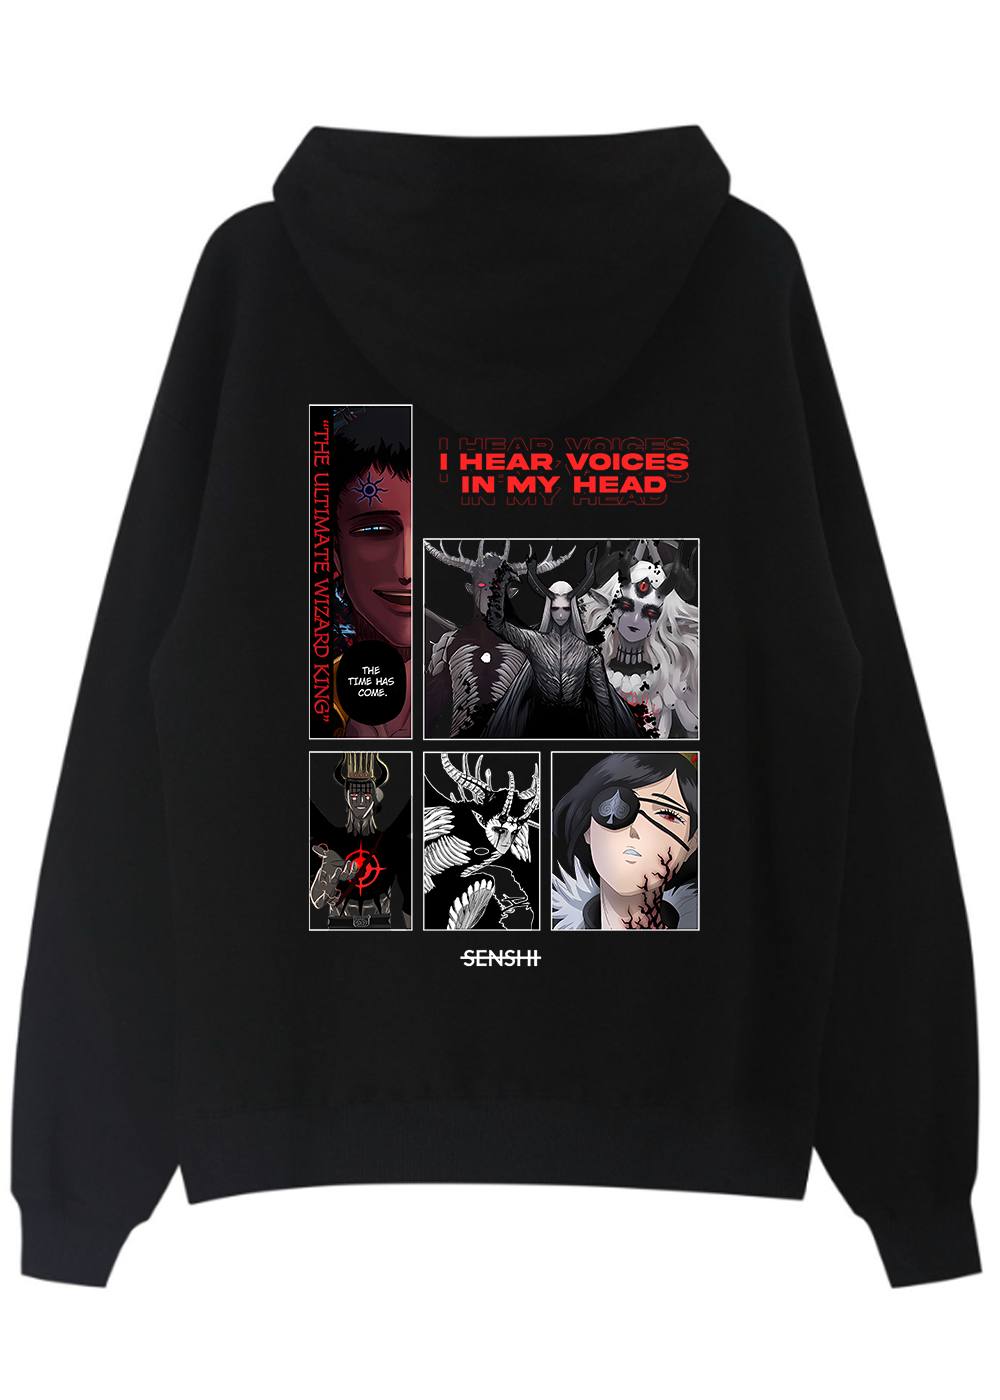 I HEAR VOICES IN MY HEAD HOODIE